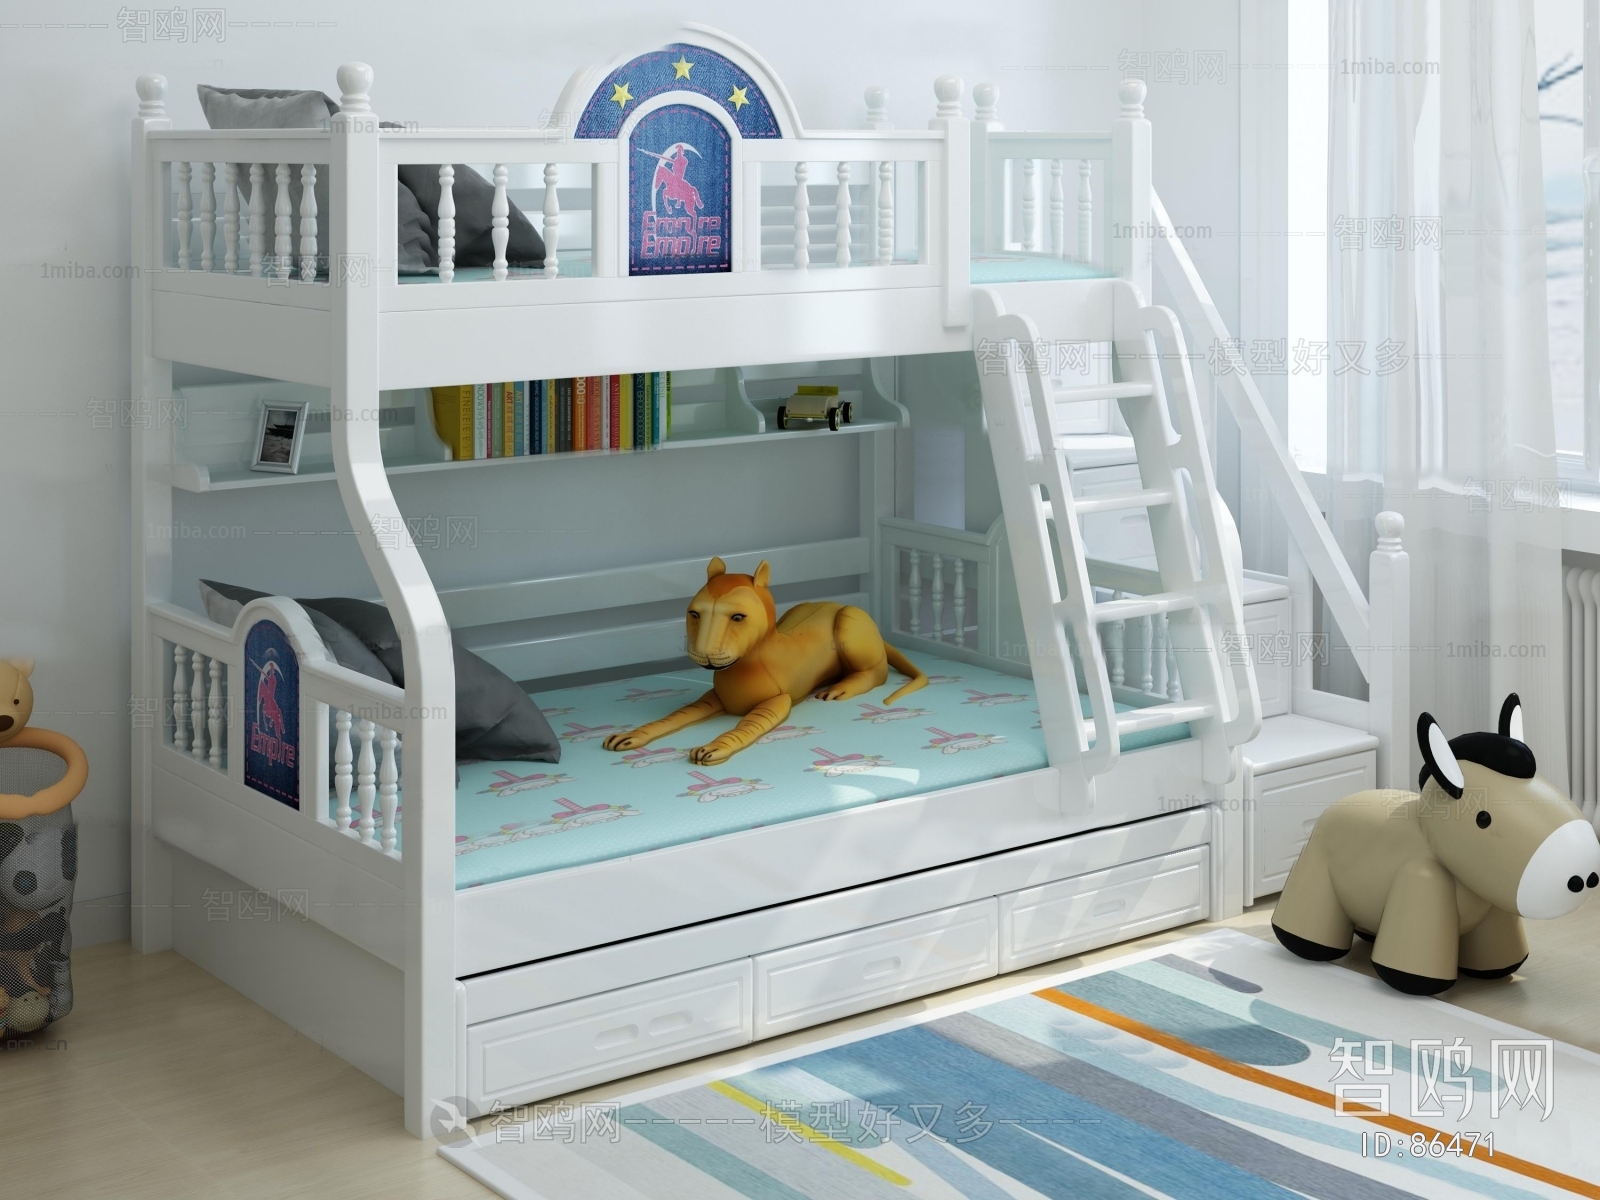 Simple European Style Bunk Bed